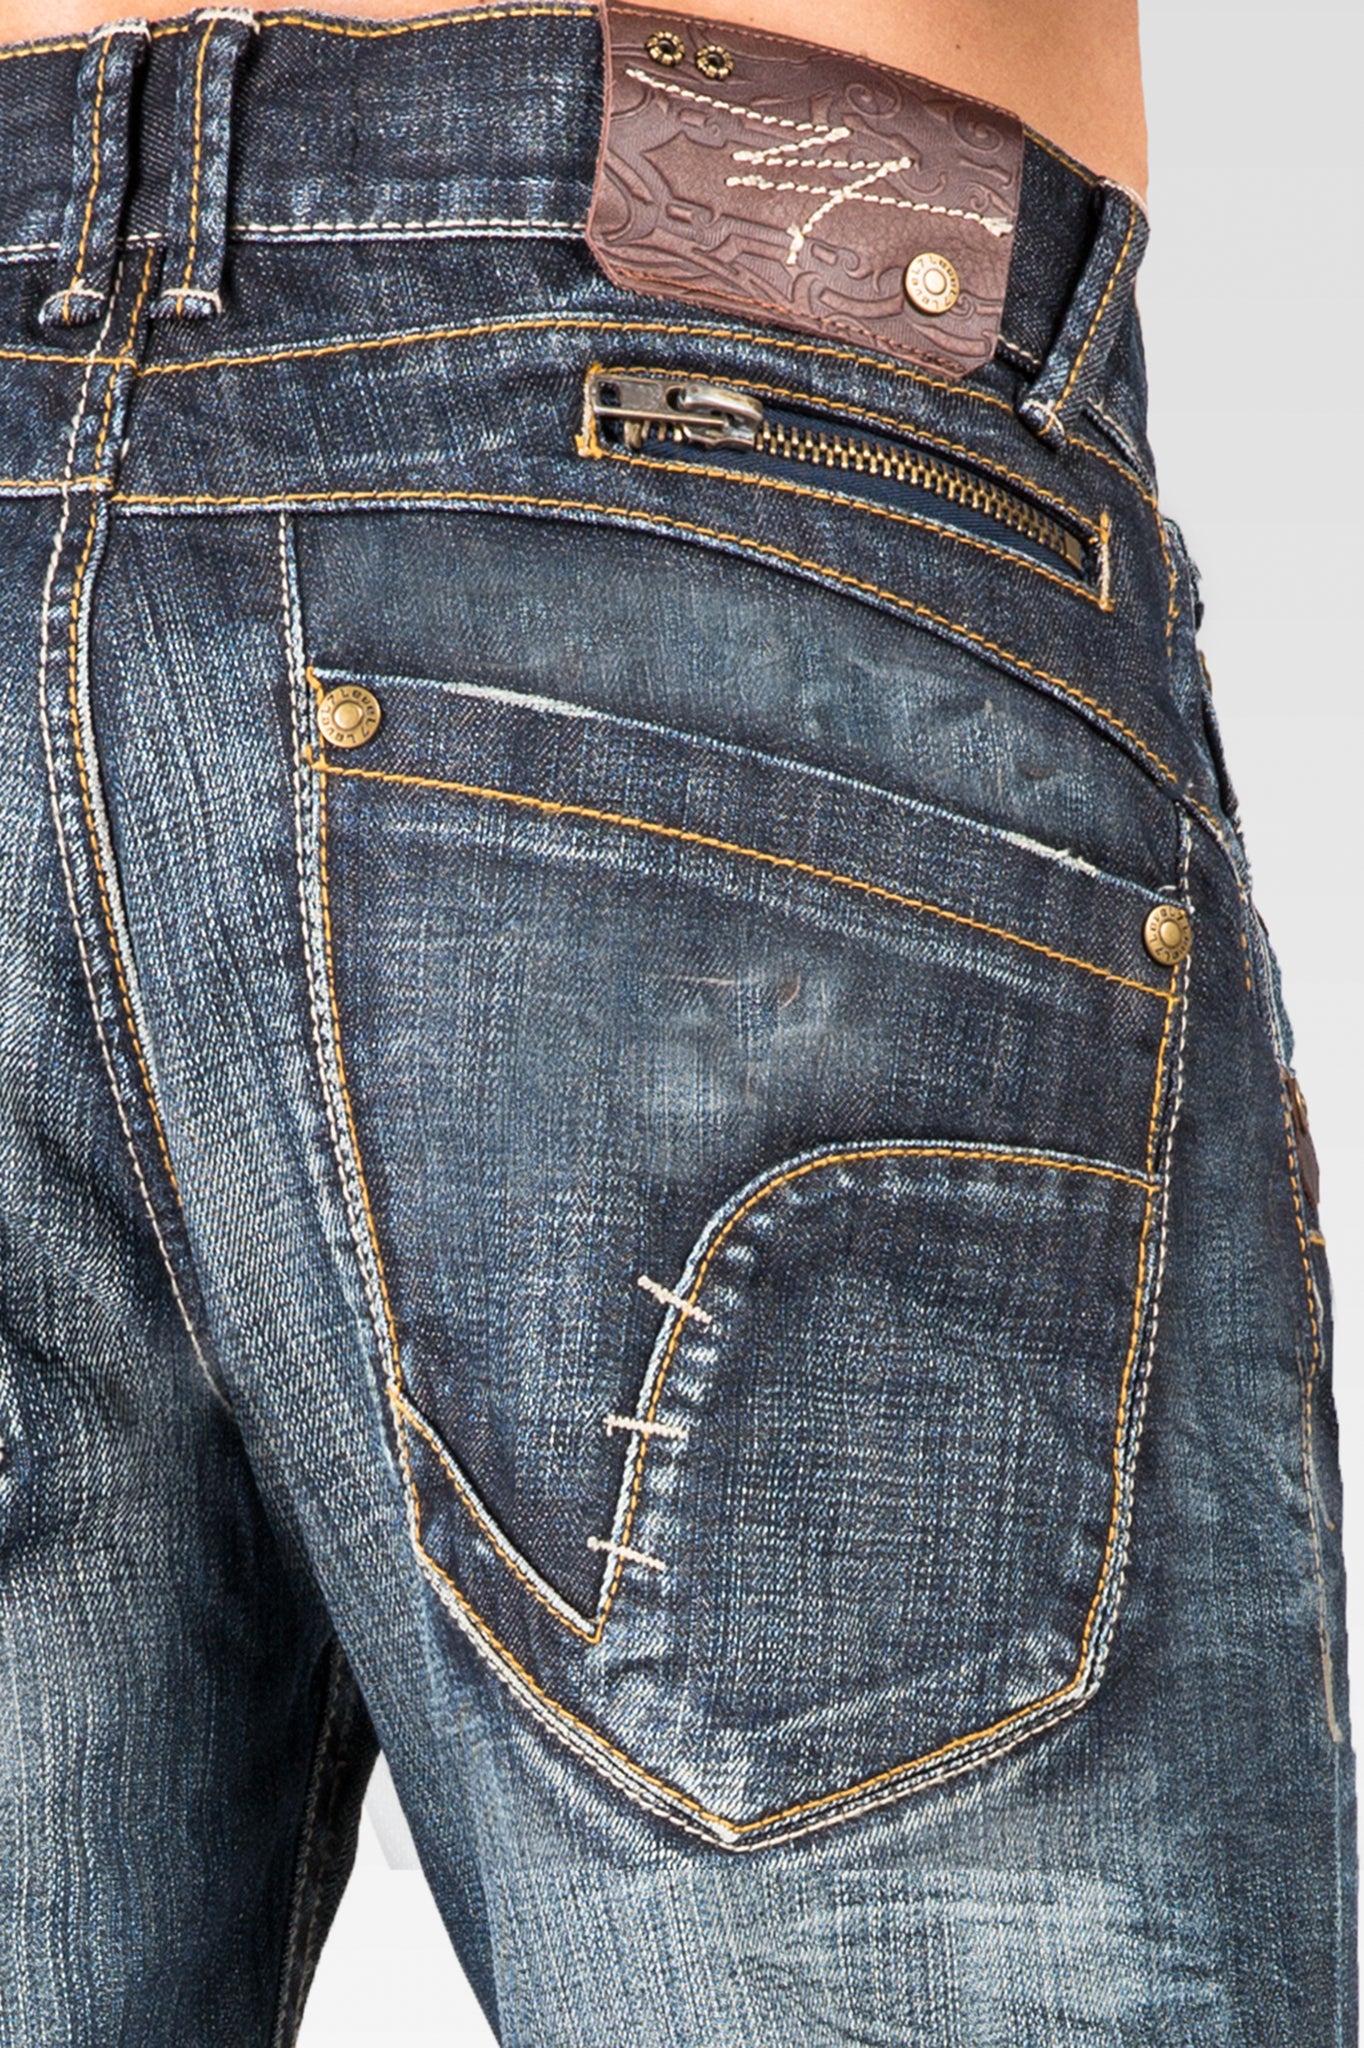 Level 7 Men's Zipper Utility Pocket Relaxed Bootcut Distressed Jean ...